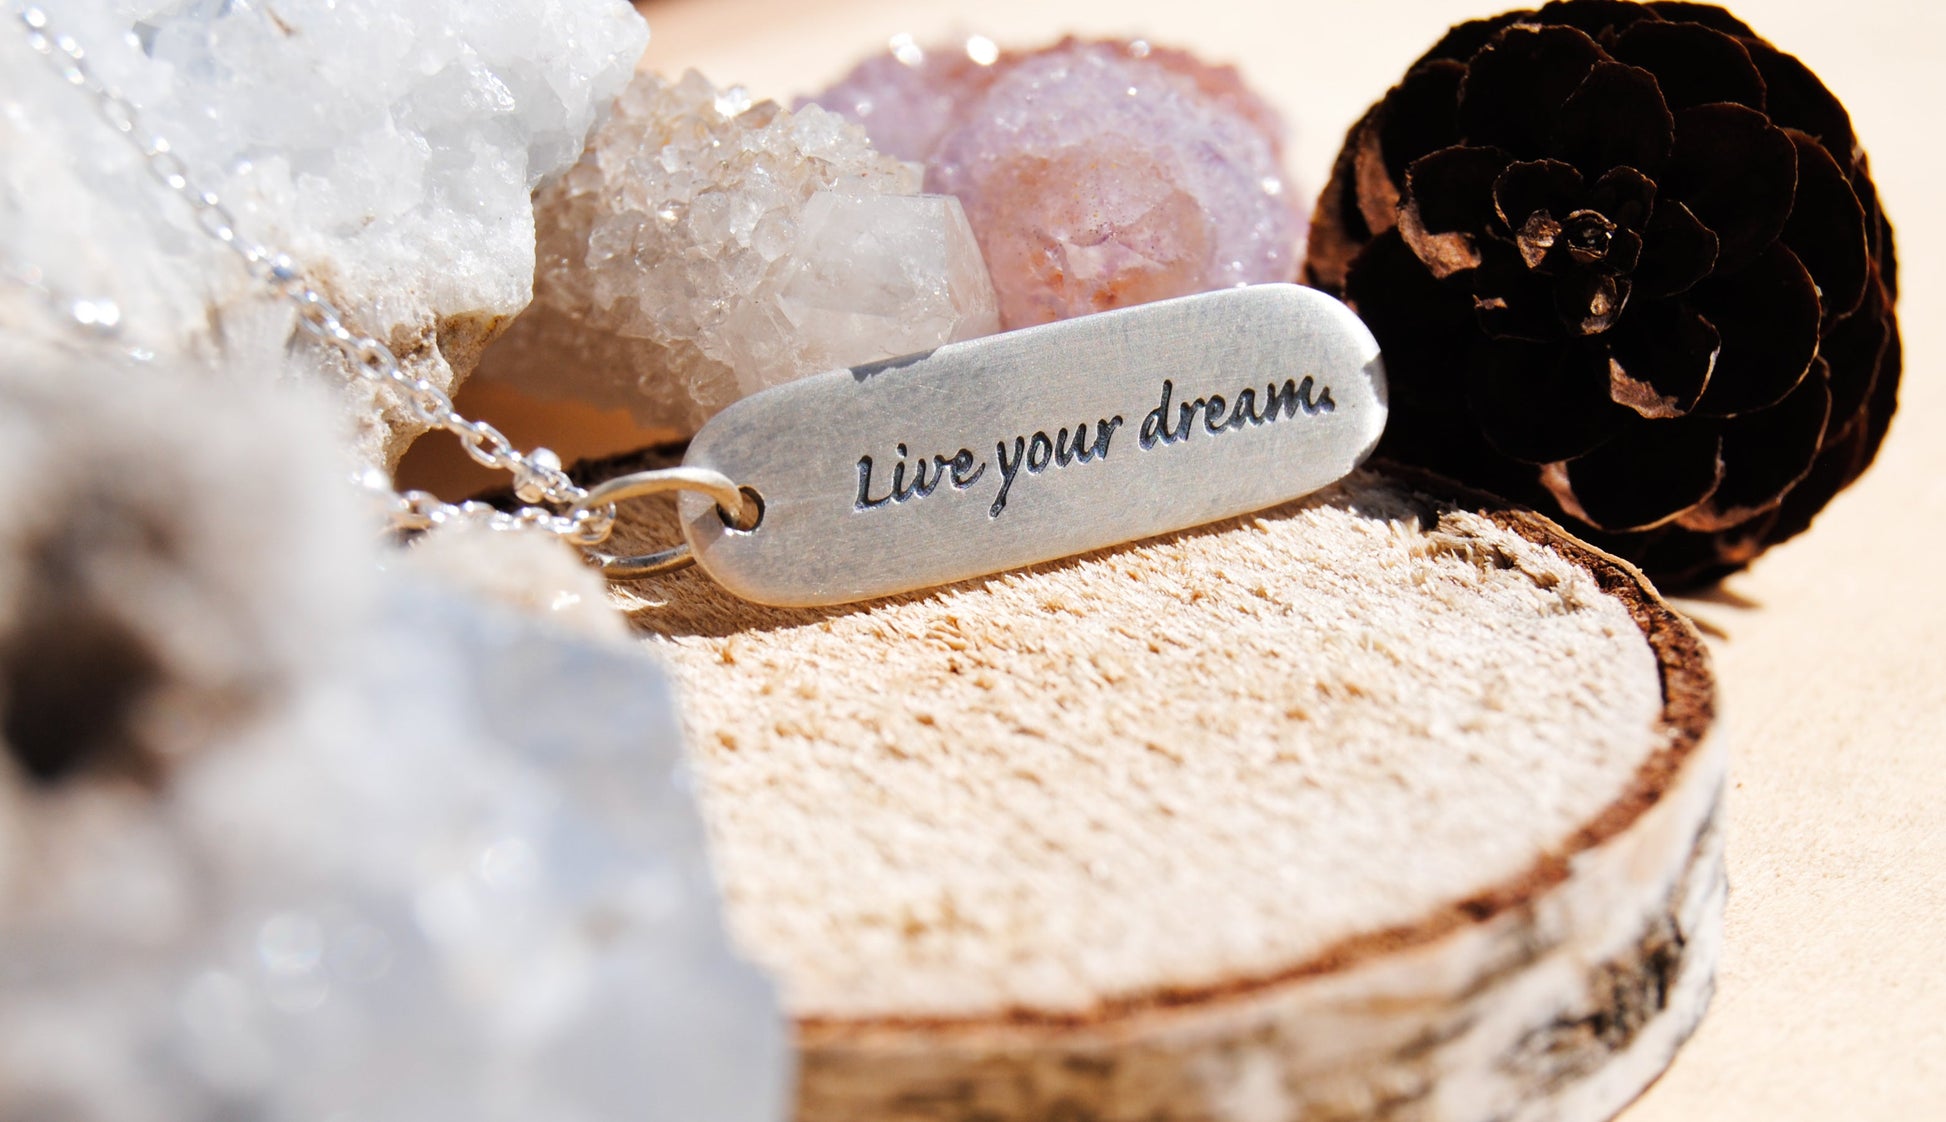 Live your dream.